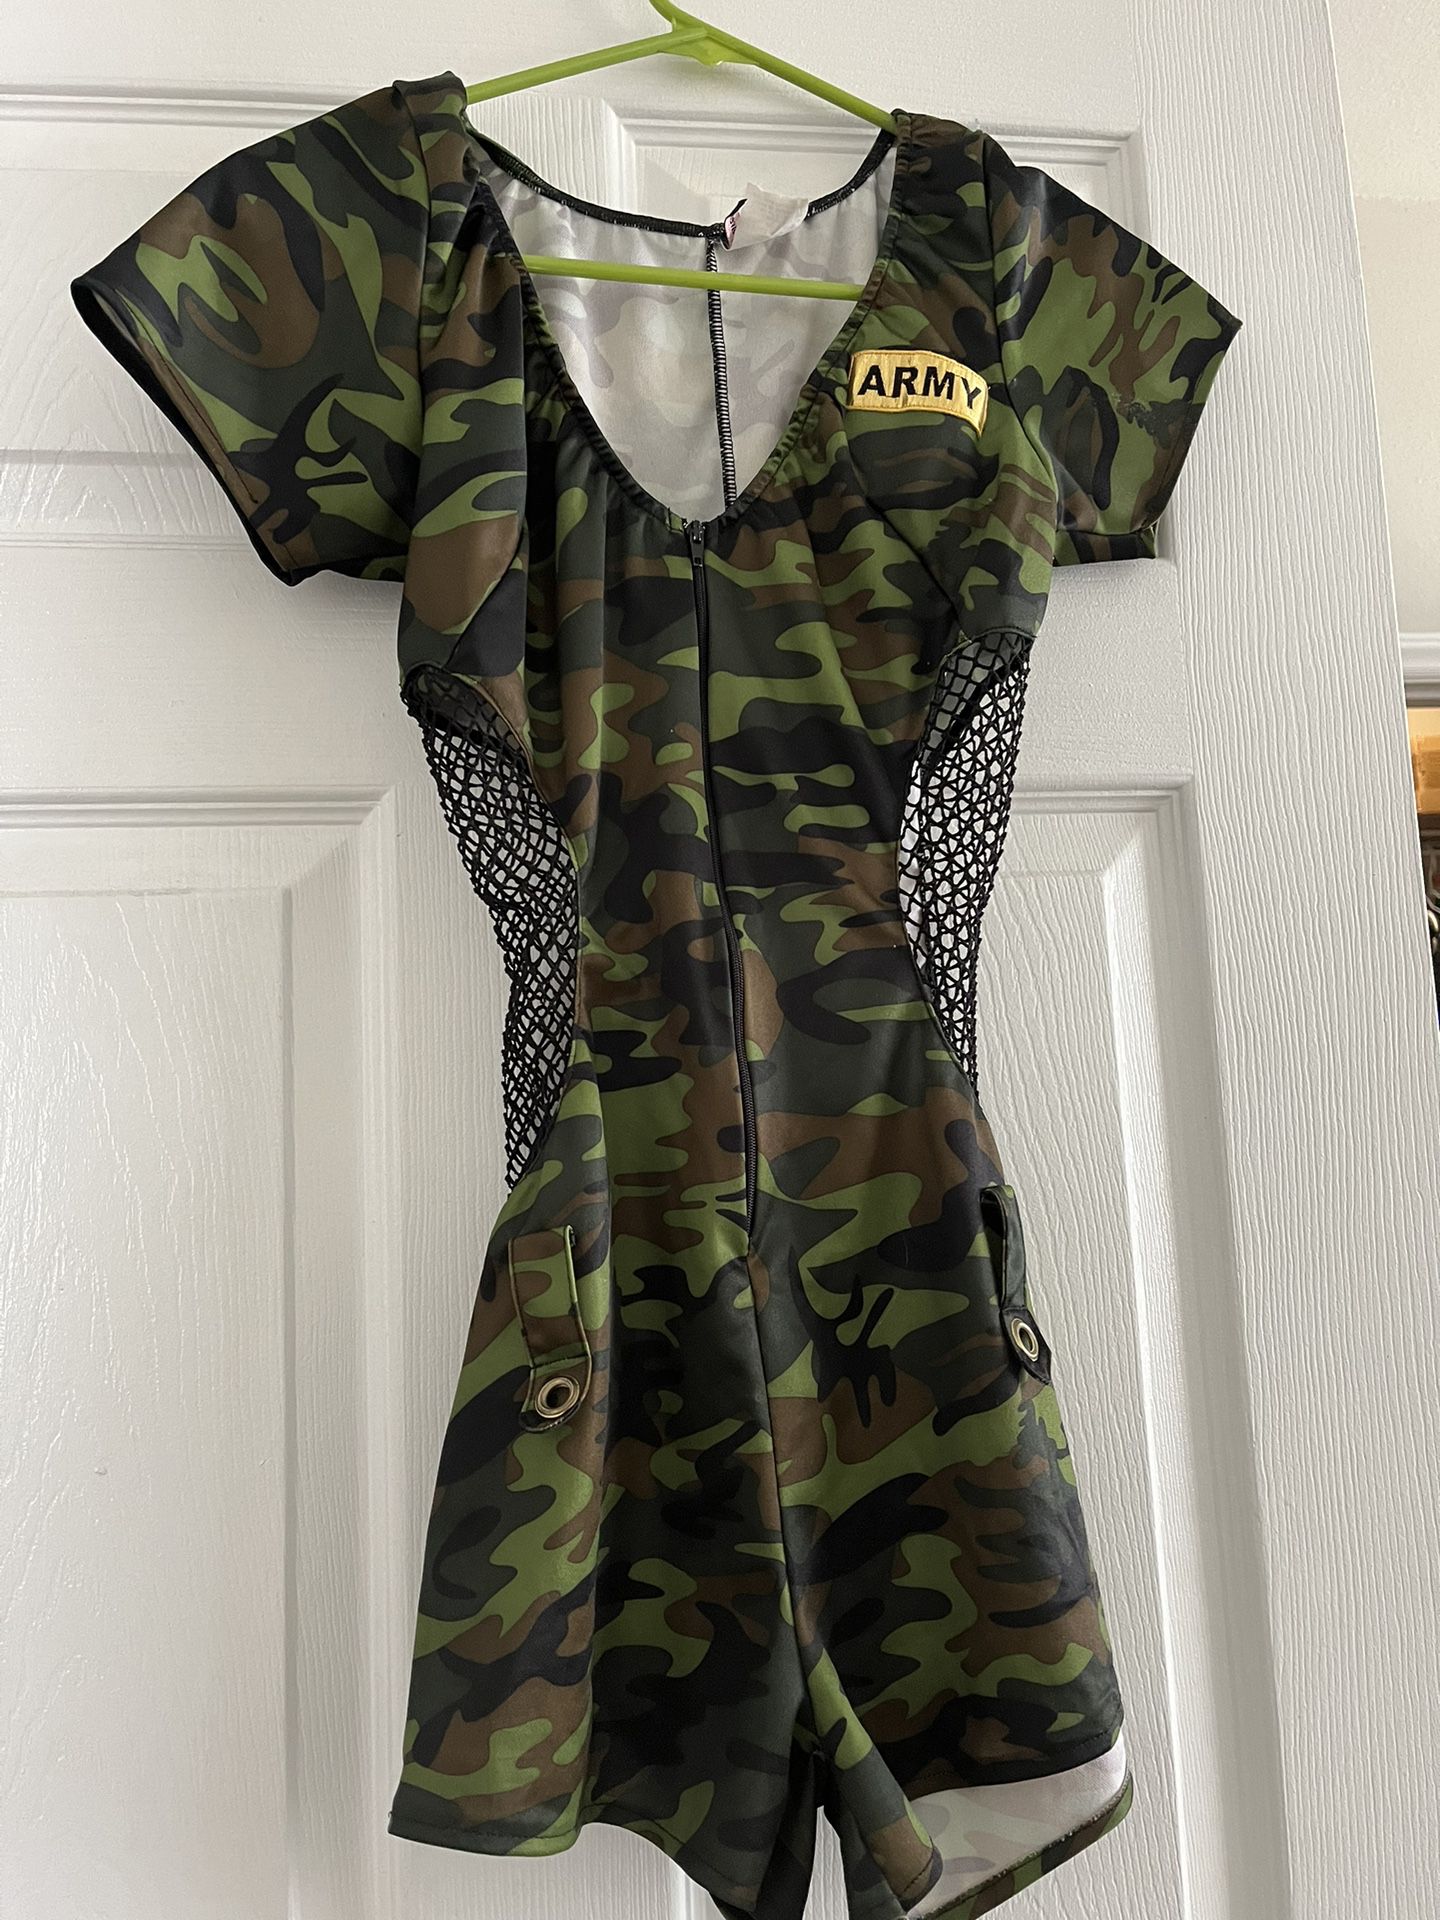 Army Outfit